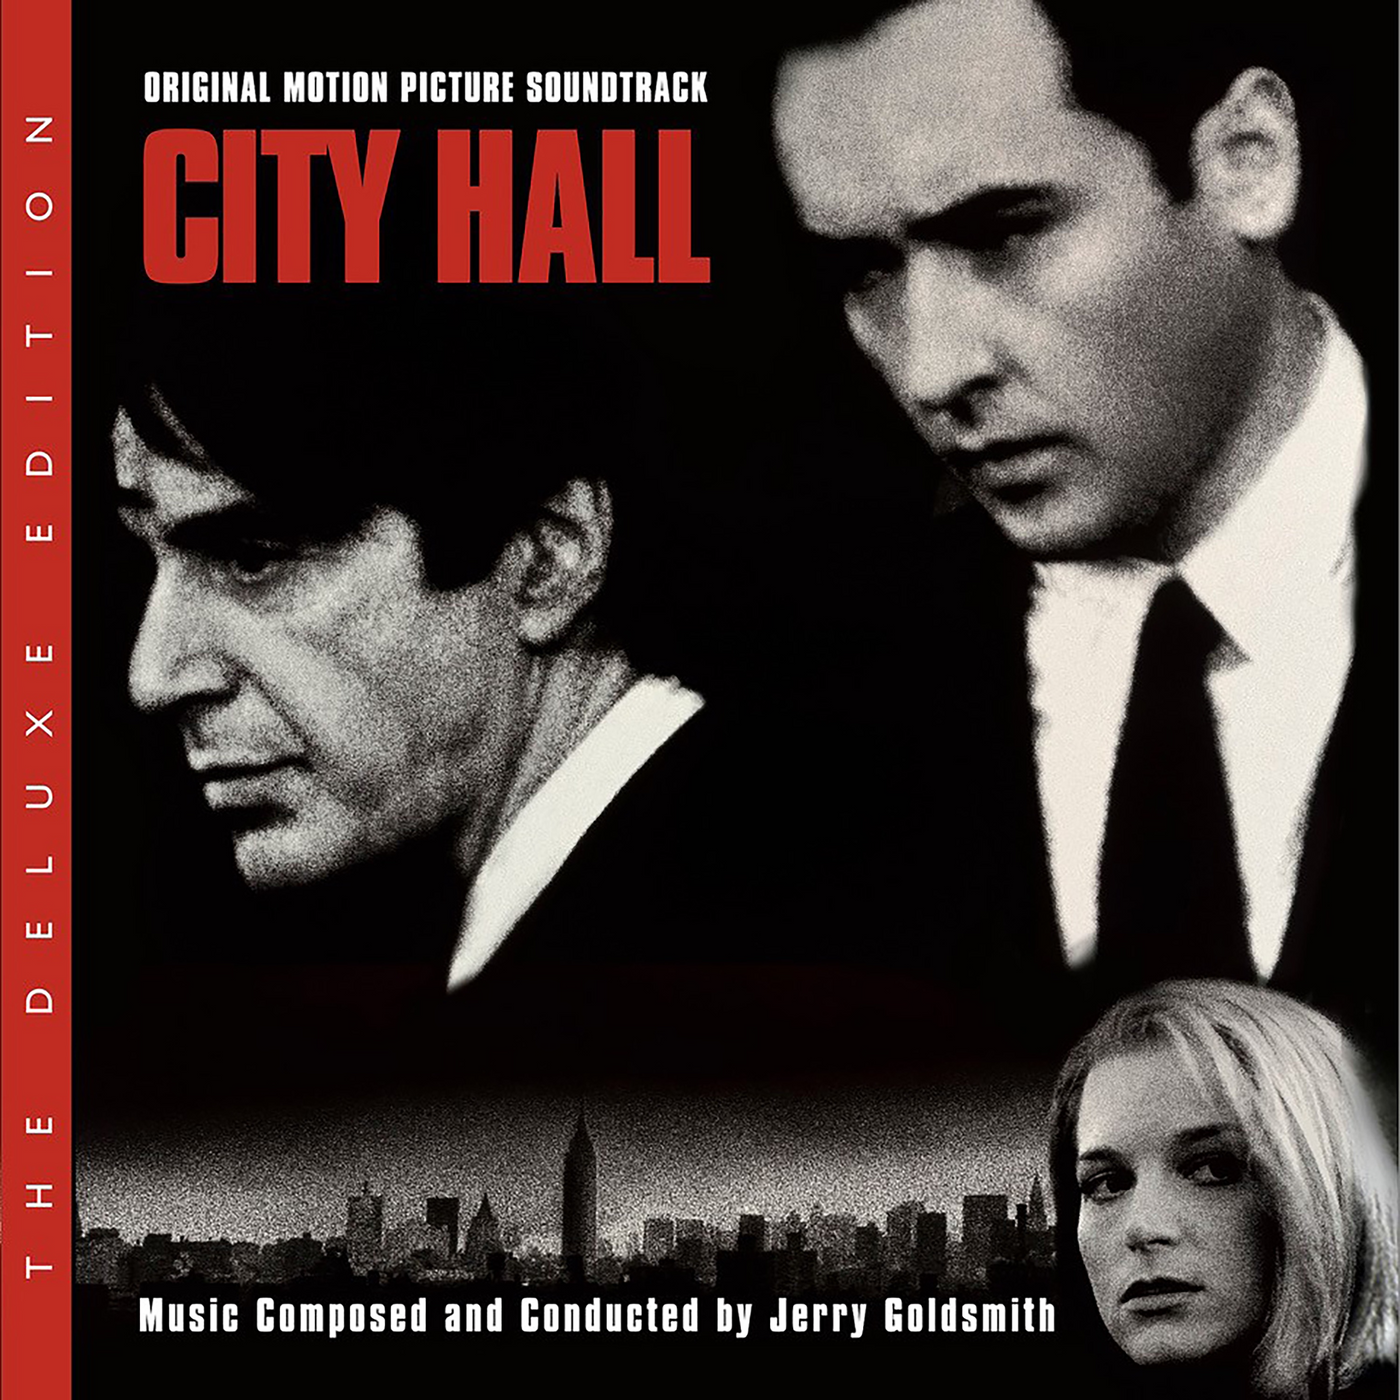 City Hall - Original Motion Picture Soundtrack - Deluxe Edition CD